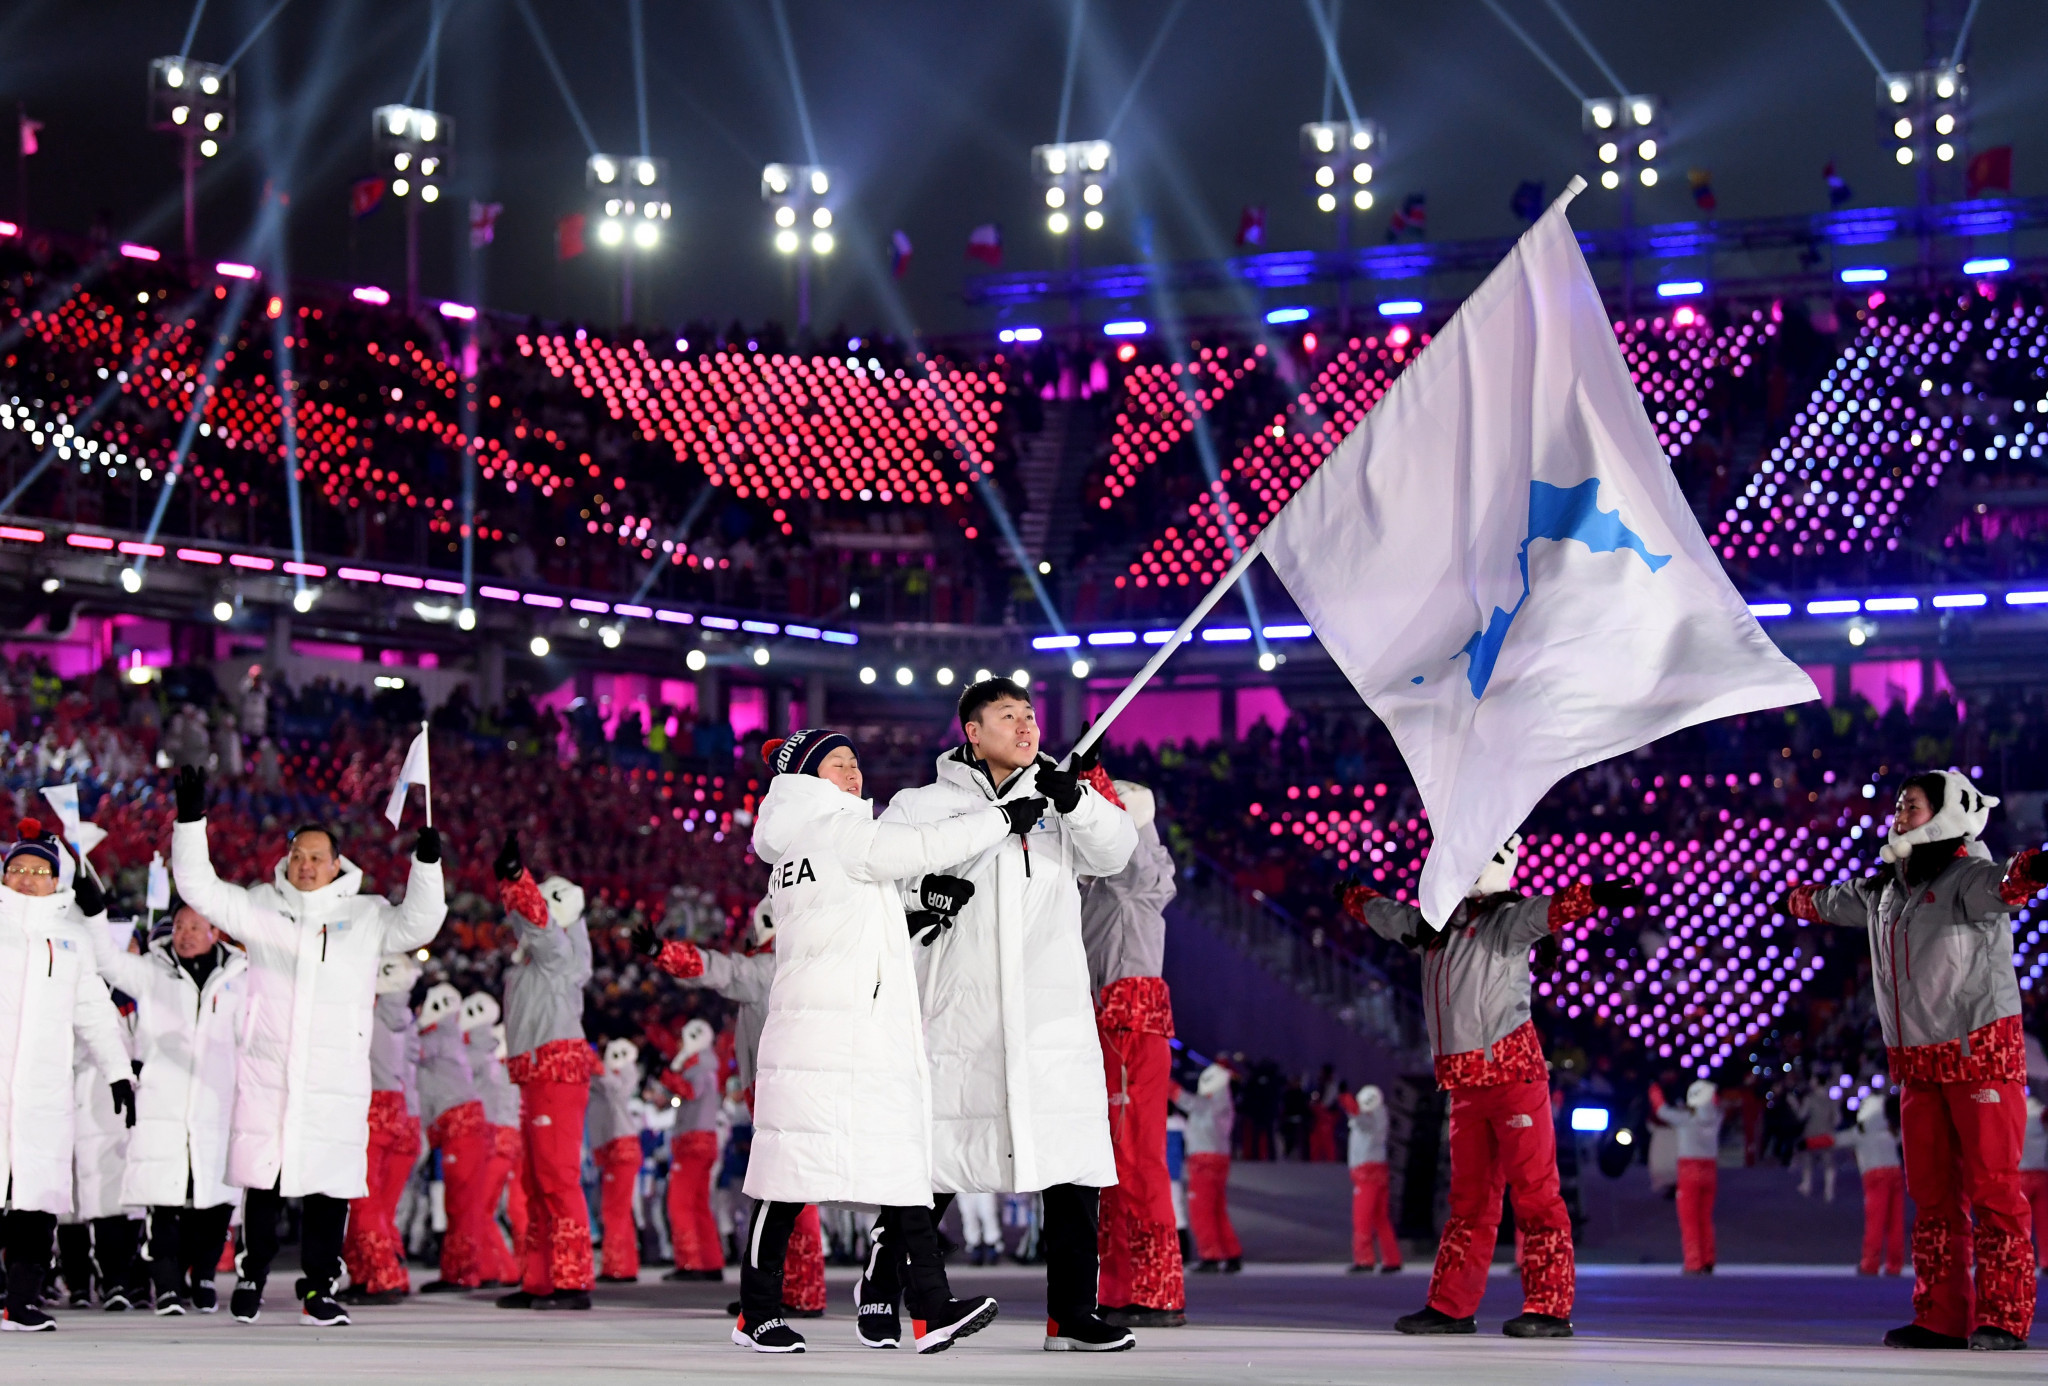 North and South Korea marched together under the unification flag at the Opening Ceremony of the Winter Olympic Games in Pyeongchang last month ©Getty Images